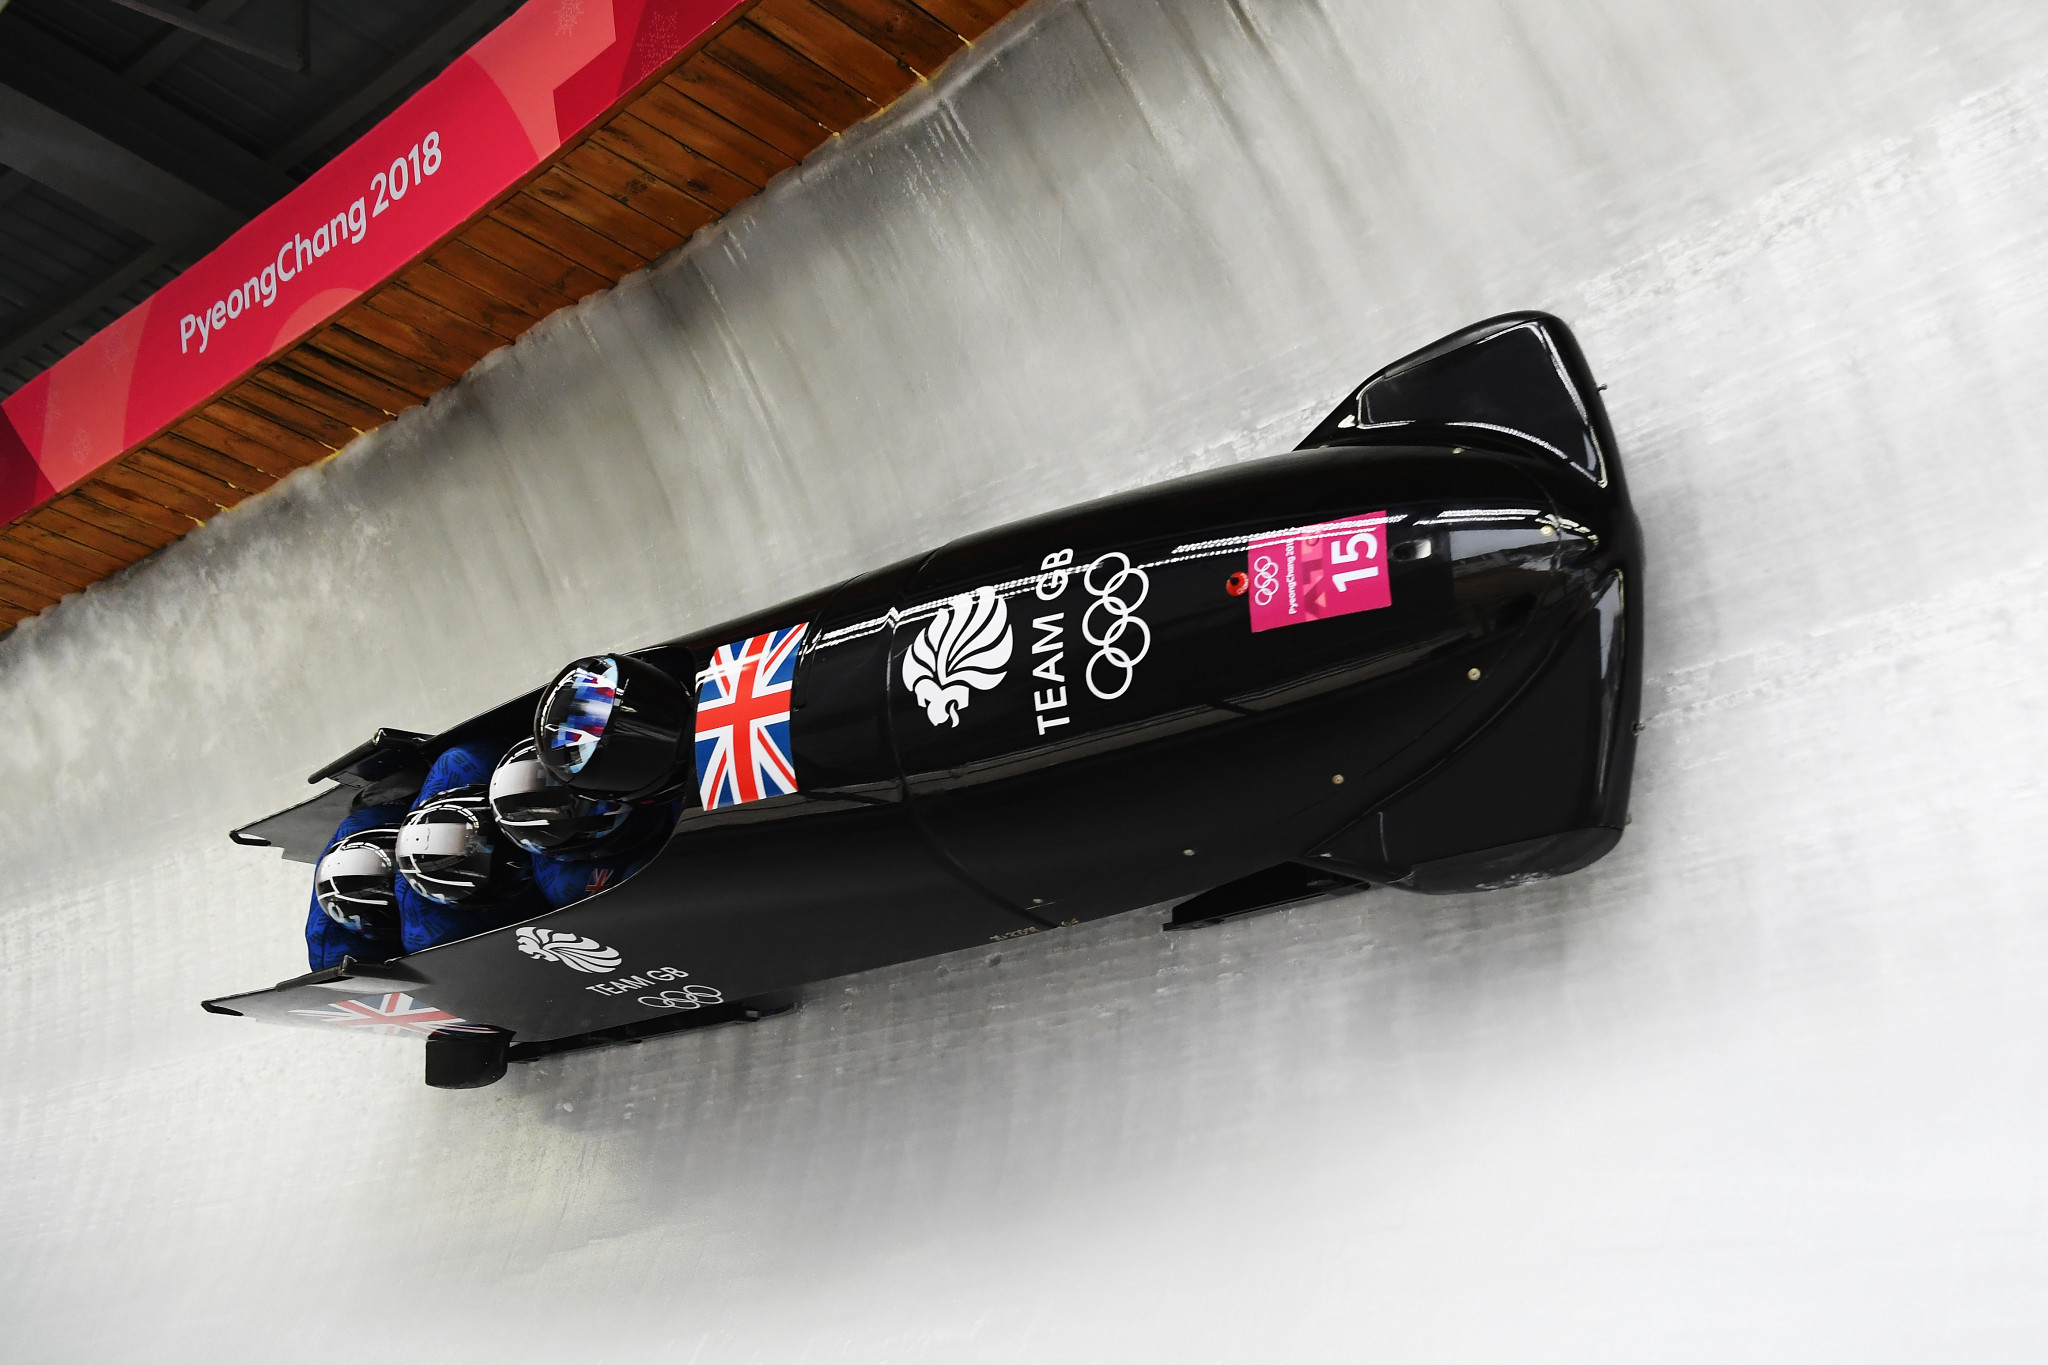 The British Bobsleigh and Skeleton Association will receive £40,000 from the UK Sport Beijing Support Fund ©Getty Images